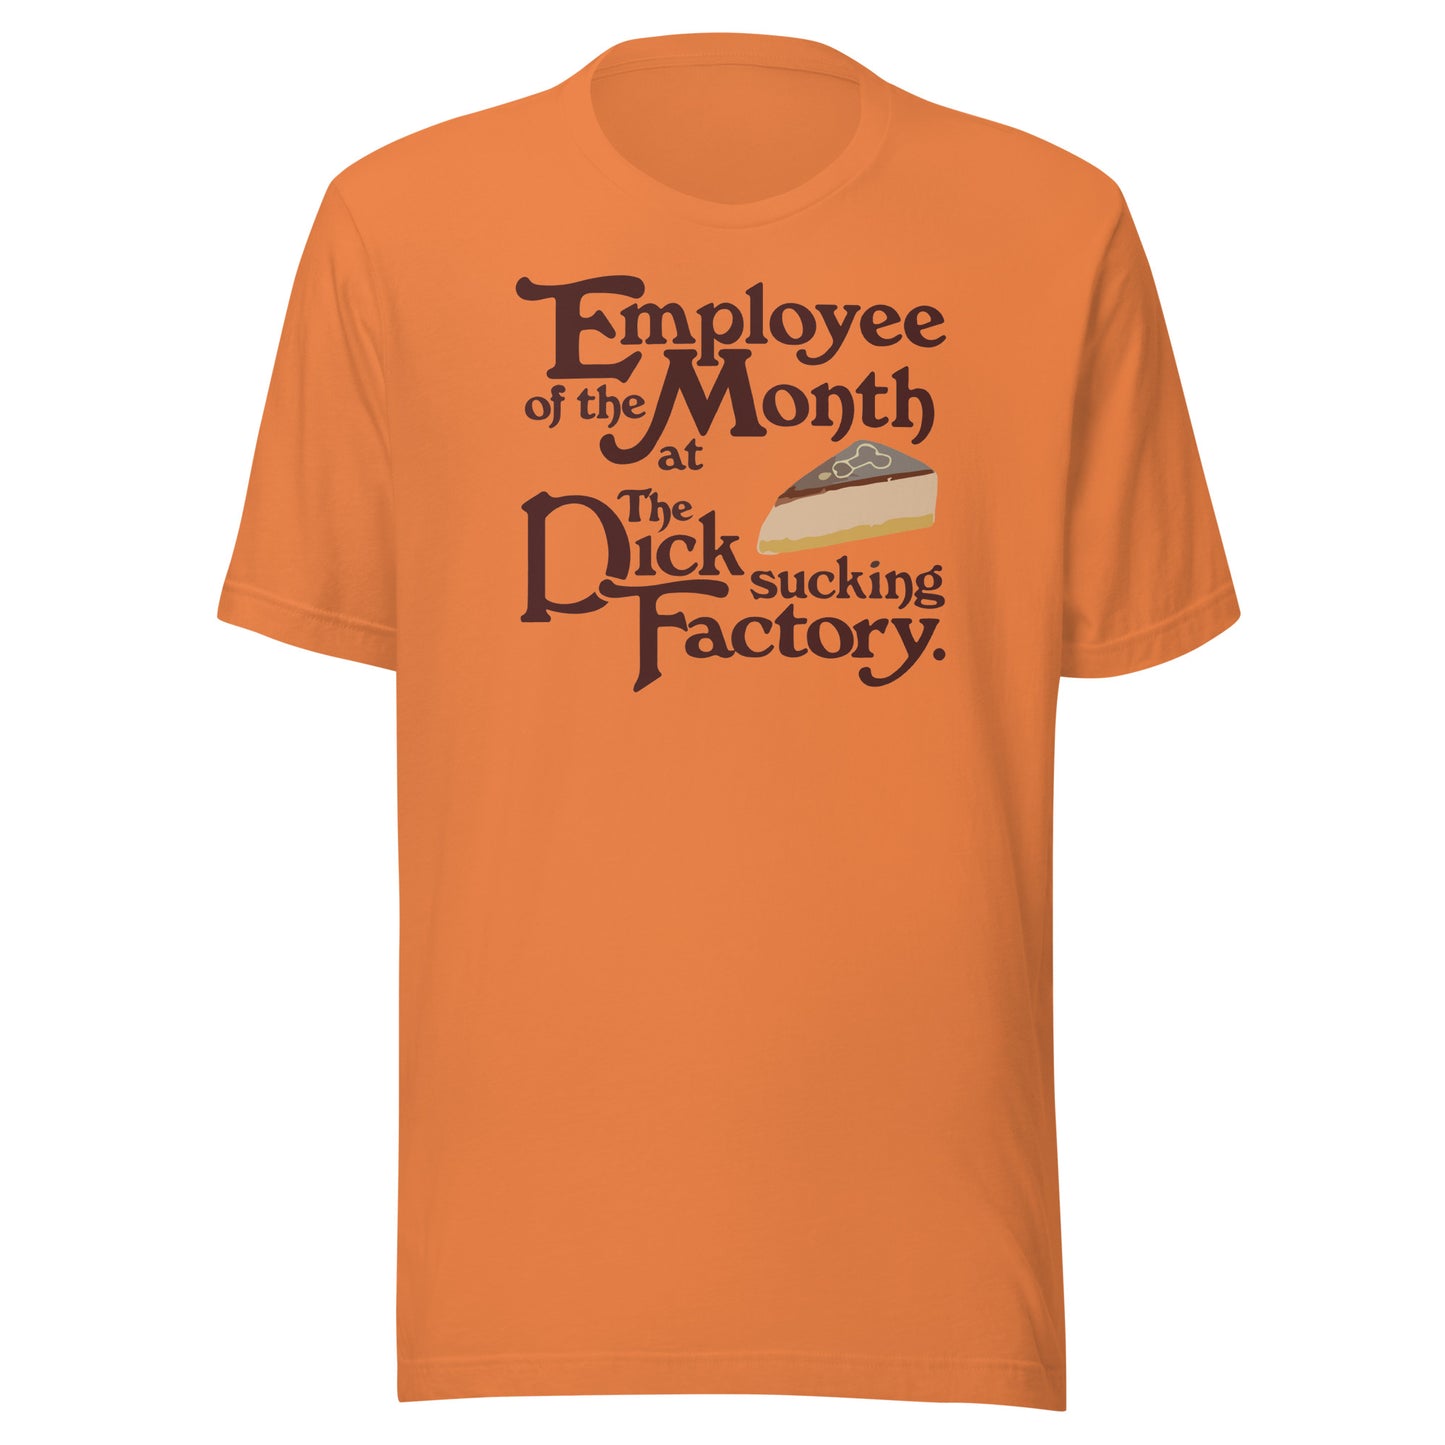 Employee Of The Month At The Dick Sucking Factory Unisex t-shirt